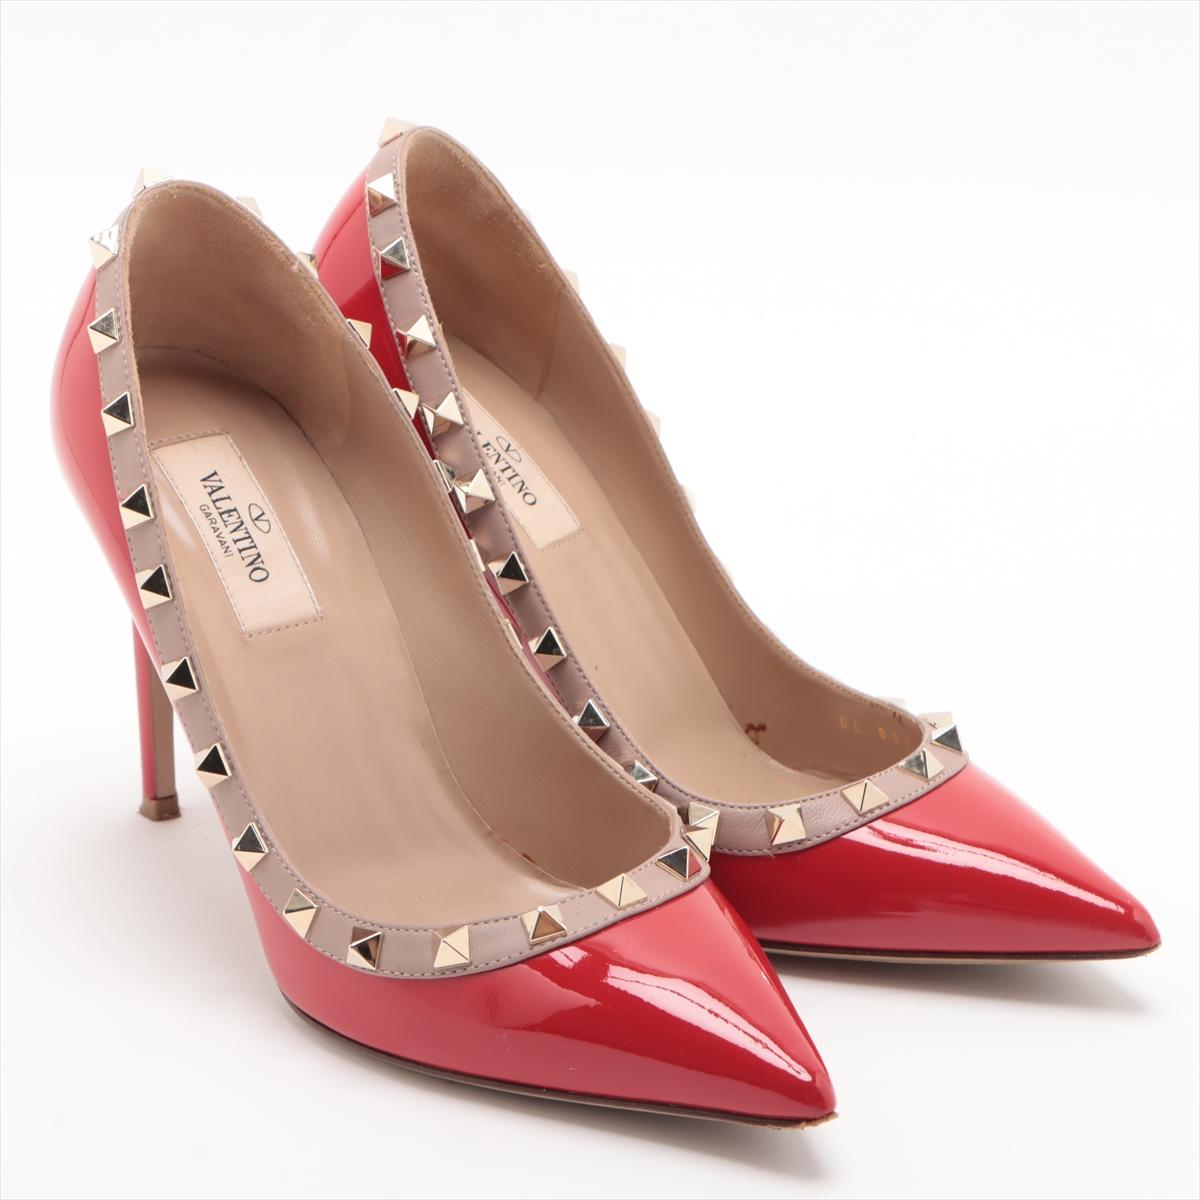 Valentino Garavani Rockstud Pointed-toe Patent Leather Pump Red In Good Condition For Sale In Indianapolis, IN